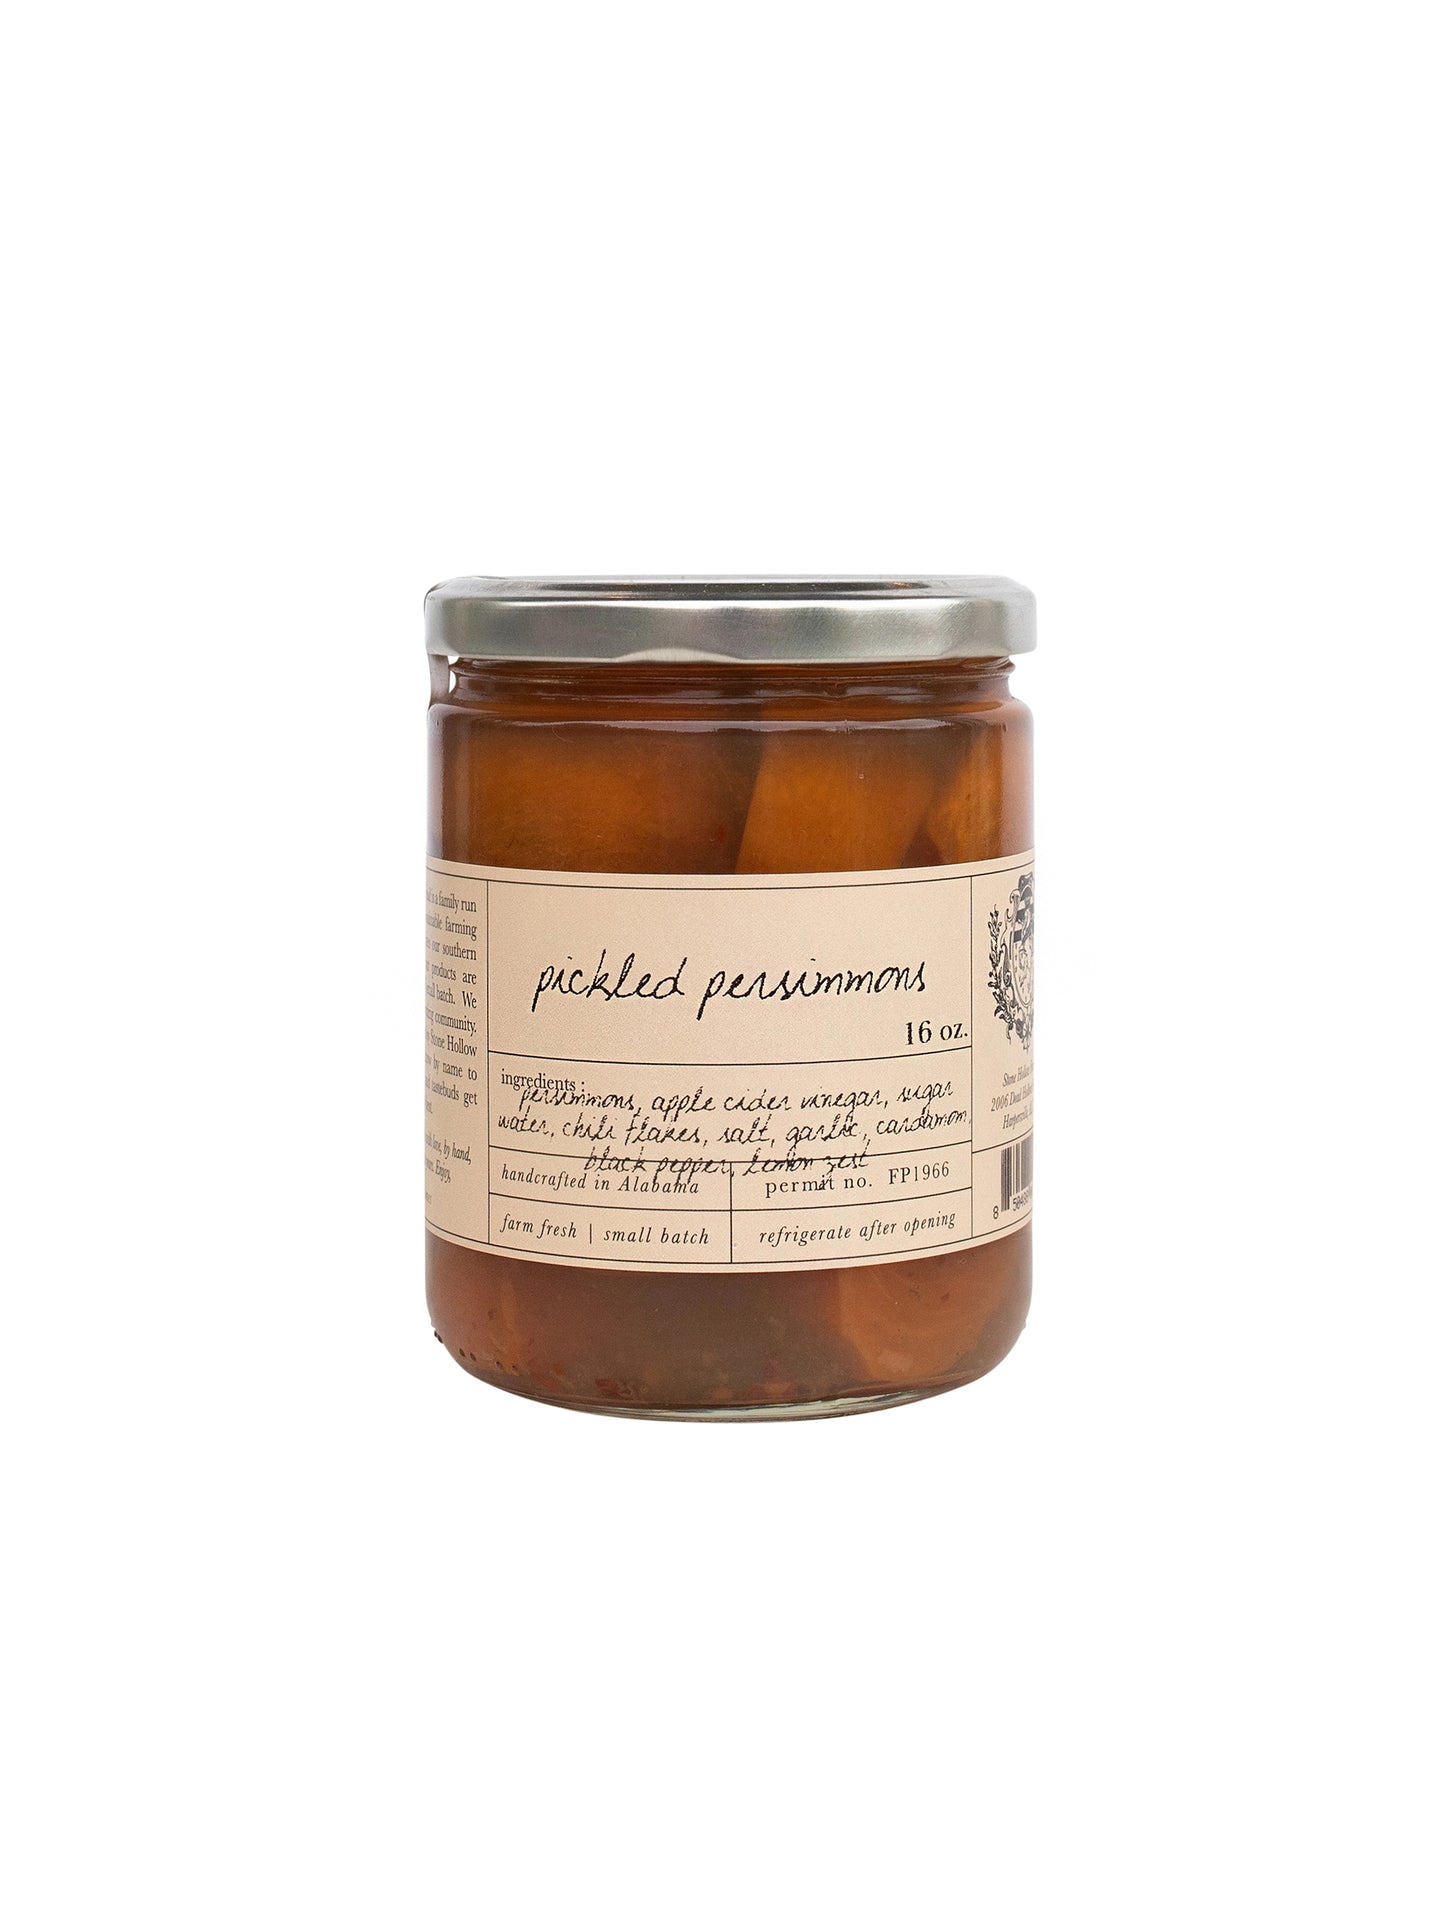 Stone Hollow Farmstead Pickled Persimmons Weston Table